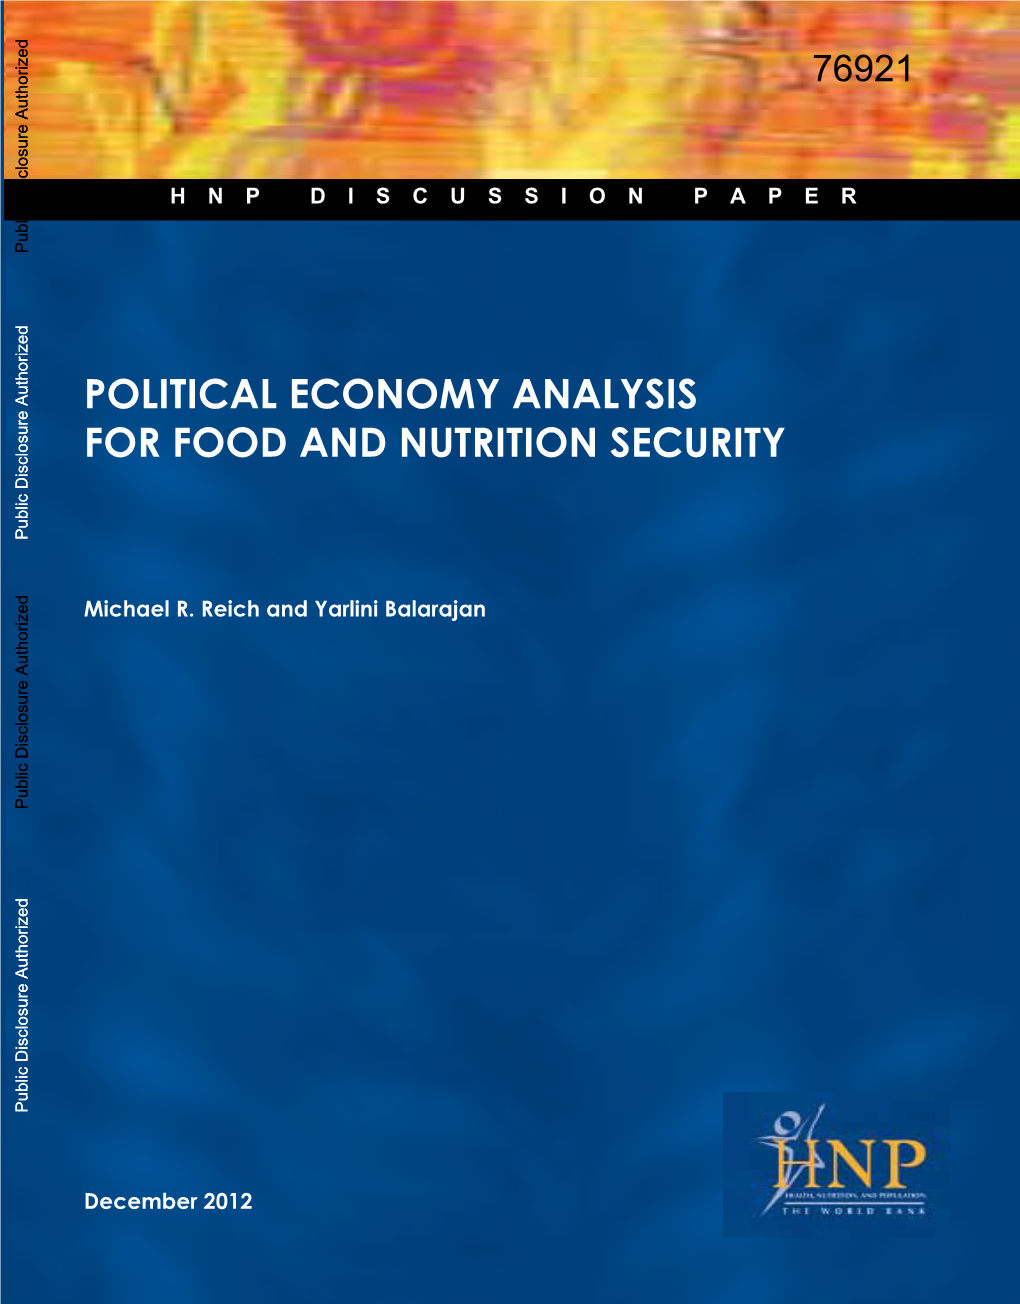 POLITICAL ECONOMY ANALYSIS for FOOD and NUTRITION SECURITY Public Disclosure Authorized